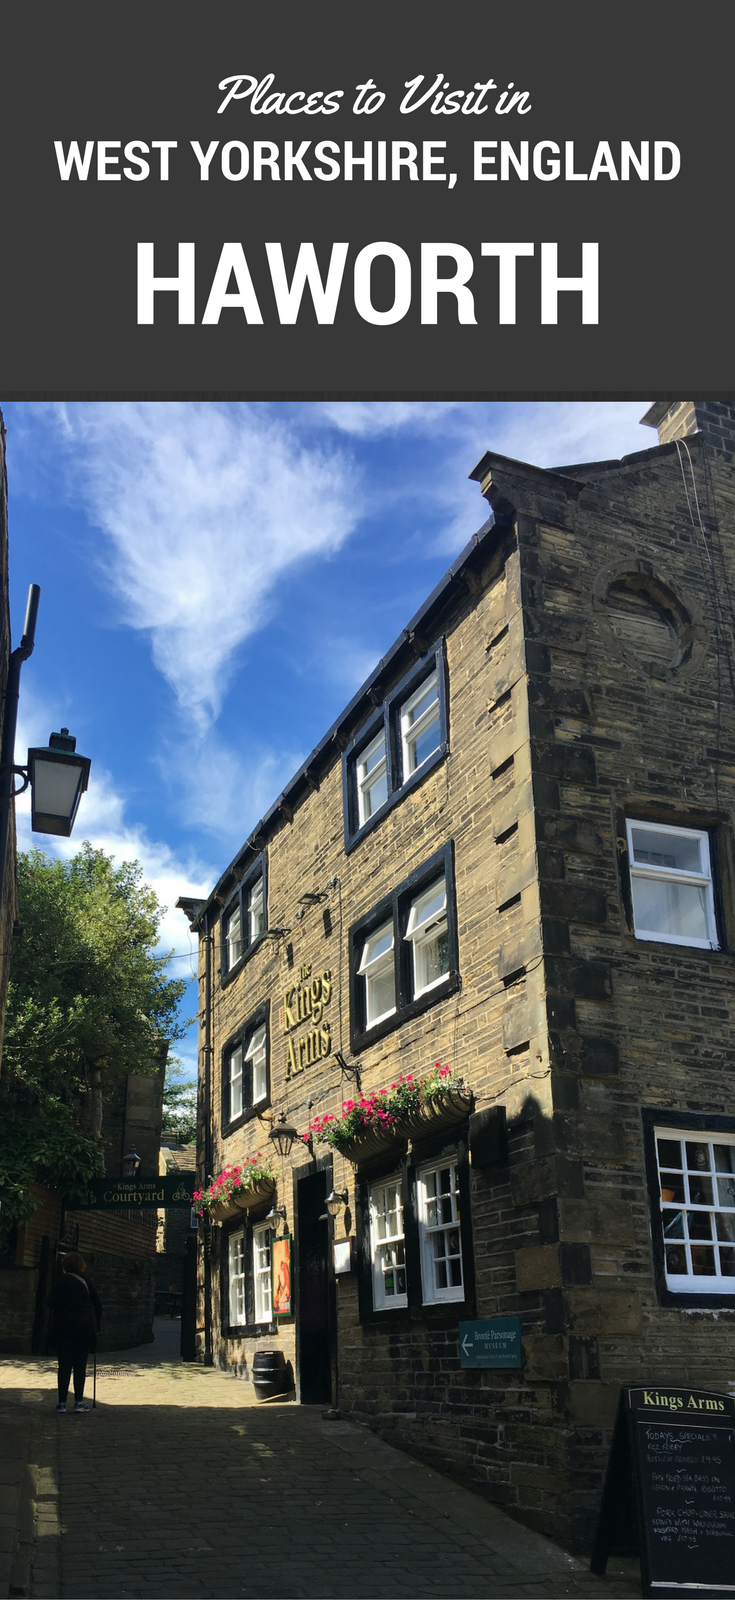 Places to visit in West Yorkshire